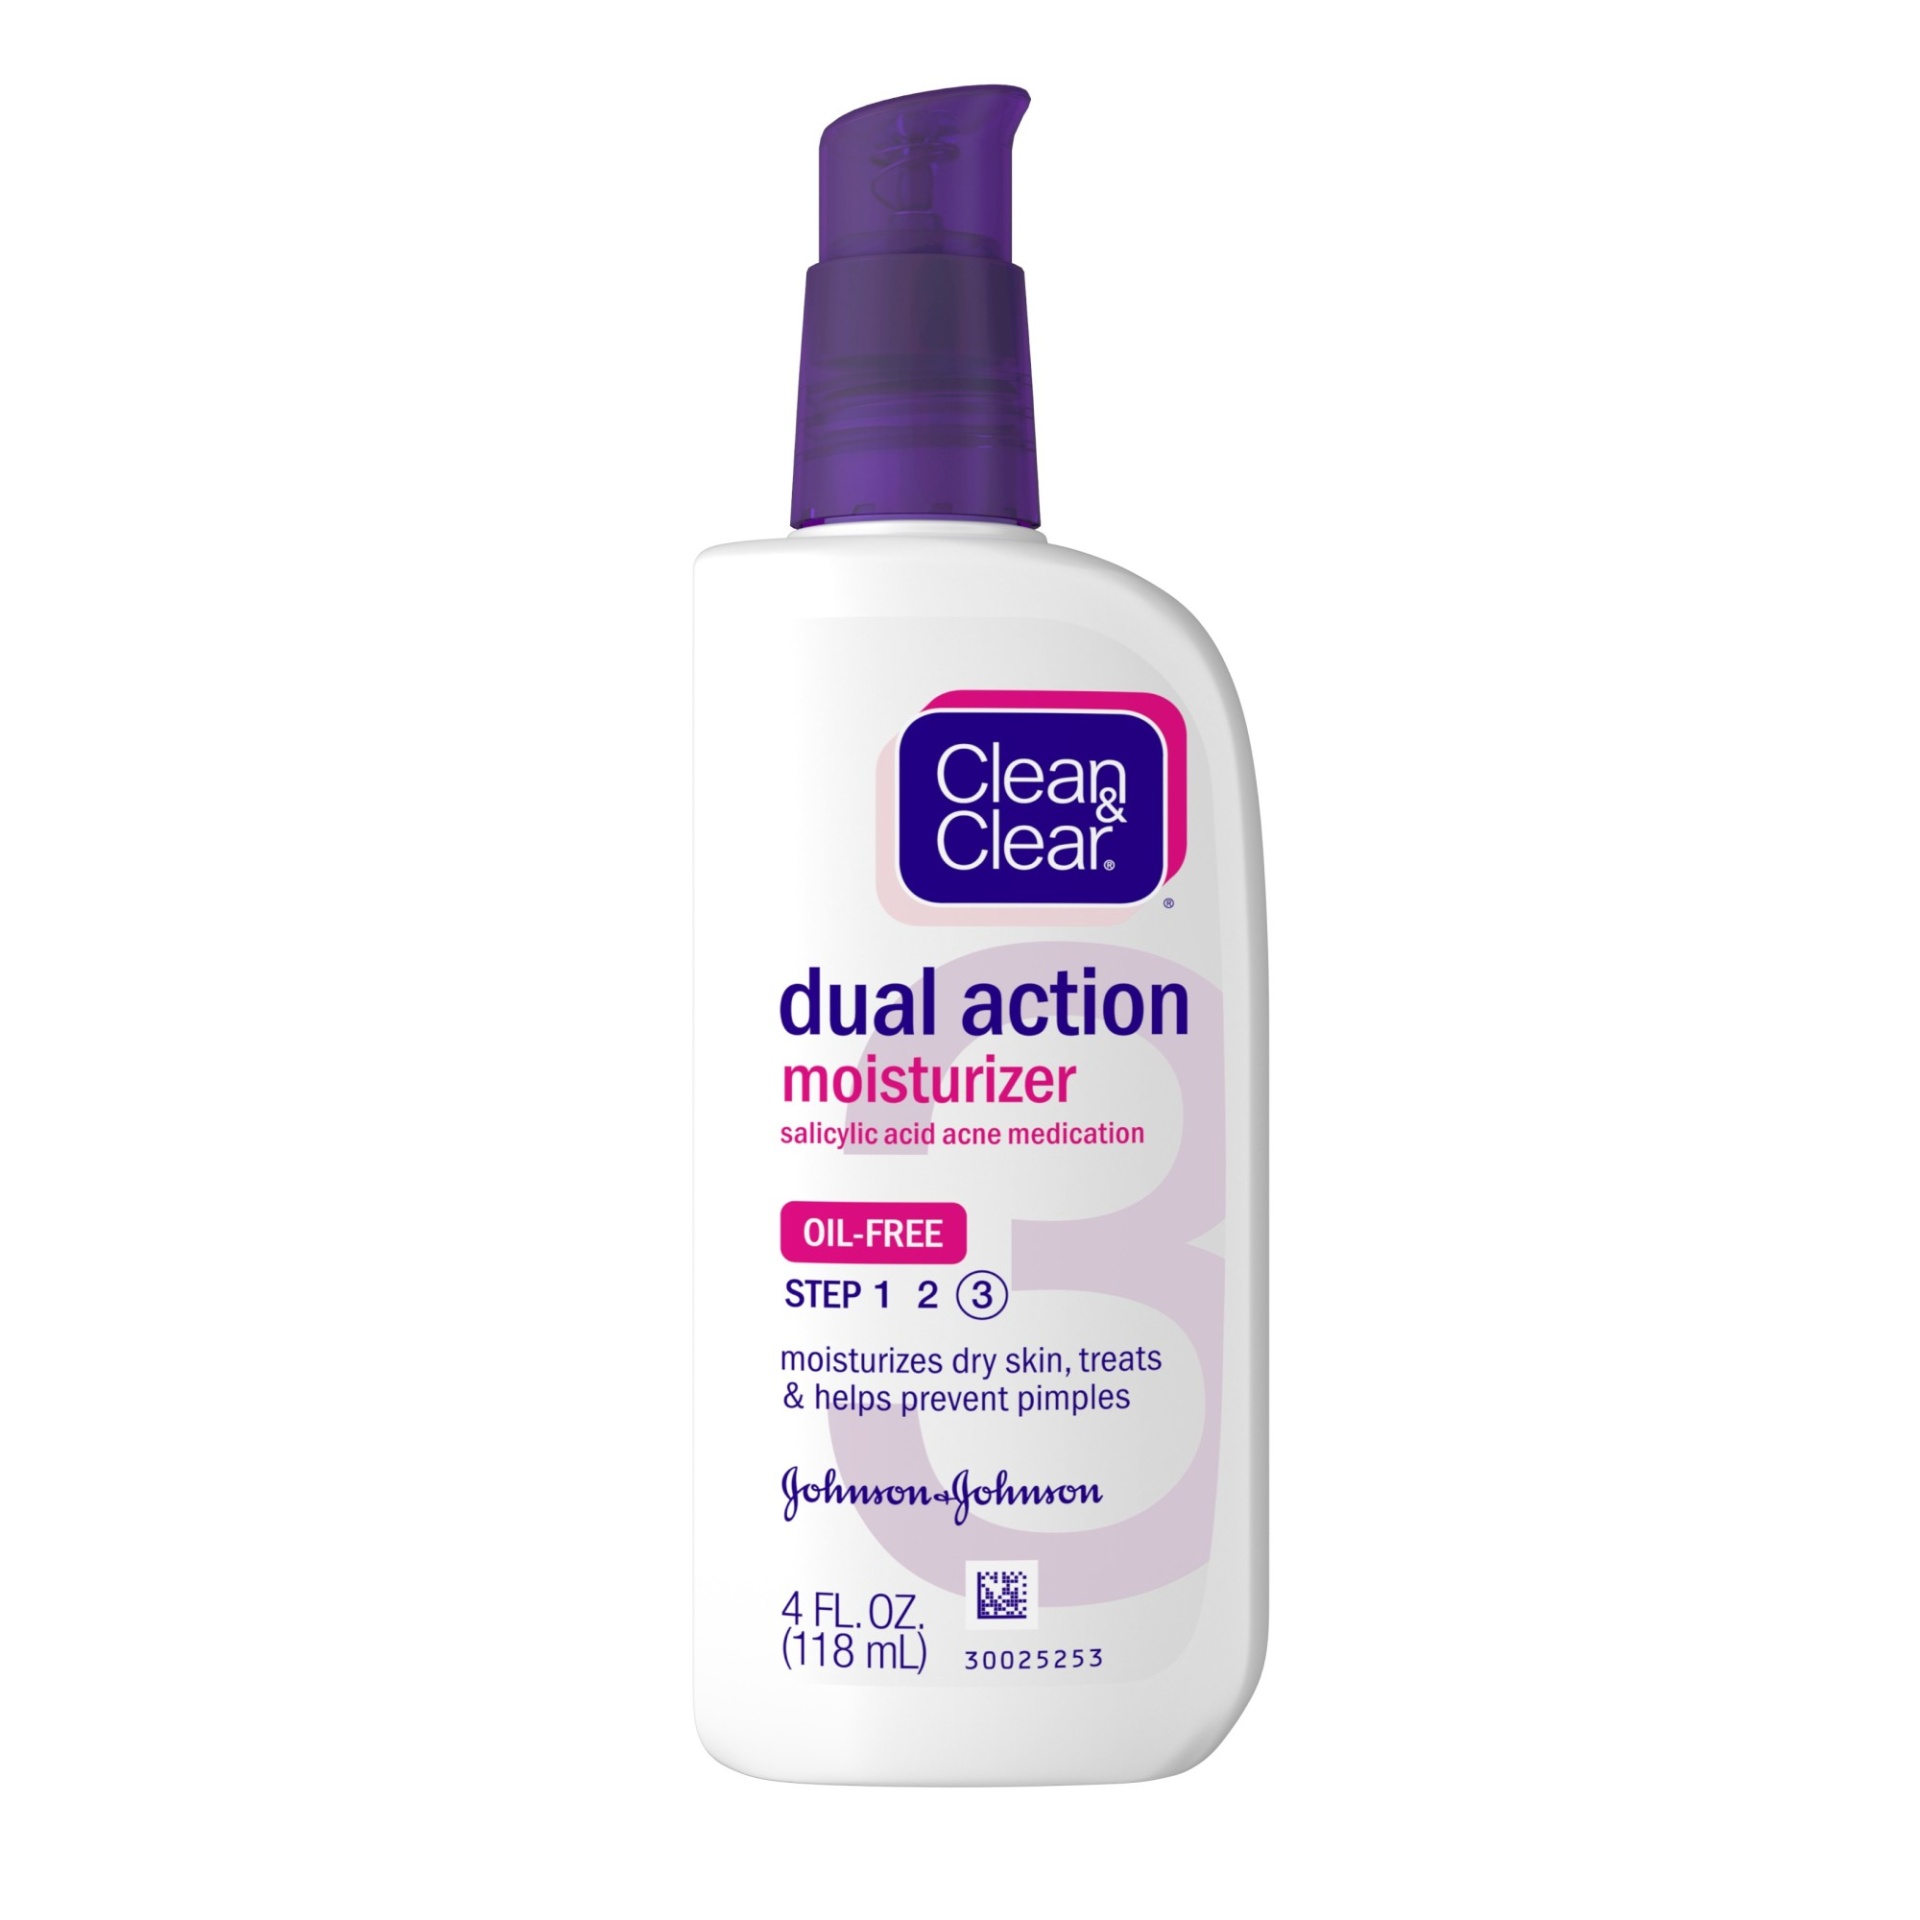 slide 1 of 8, Clean & Clear Essentials Dual Action Facial Moisturizer, 0.5% Salicylic Acid Acne Medication to Moisturize Dry Skin, Treat Acne & Help Prevent Pimples, Oil Free for Acne-Prone Skin, 4 fl oz